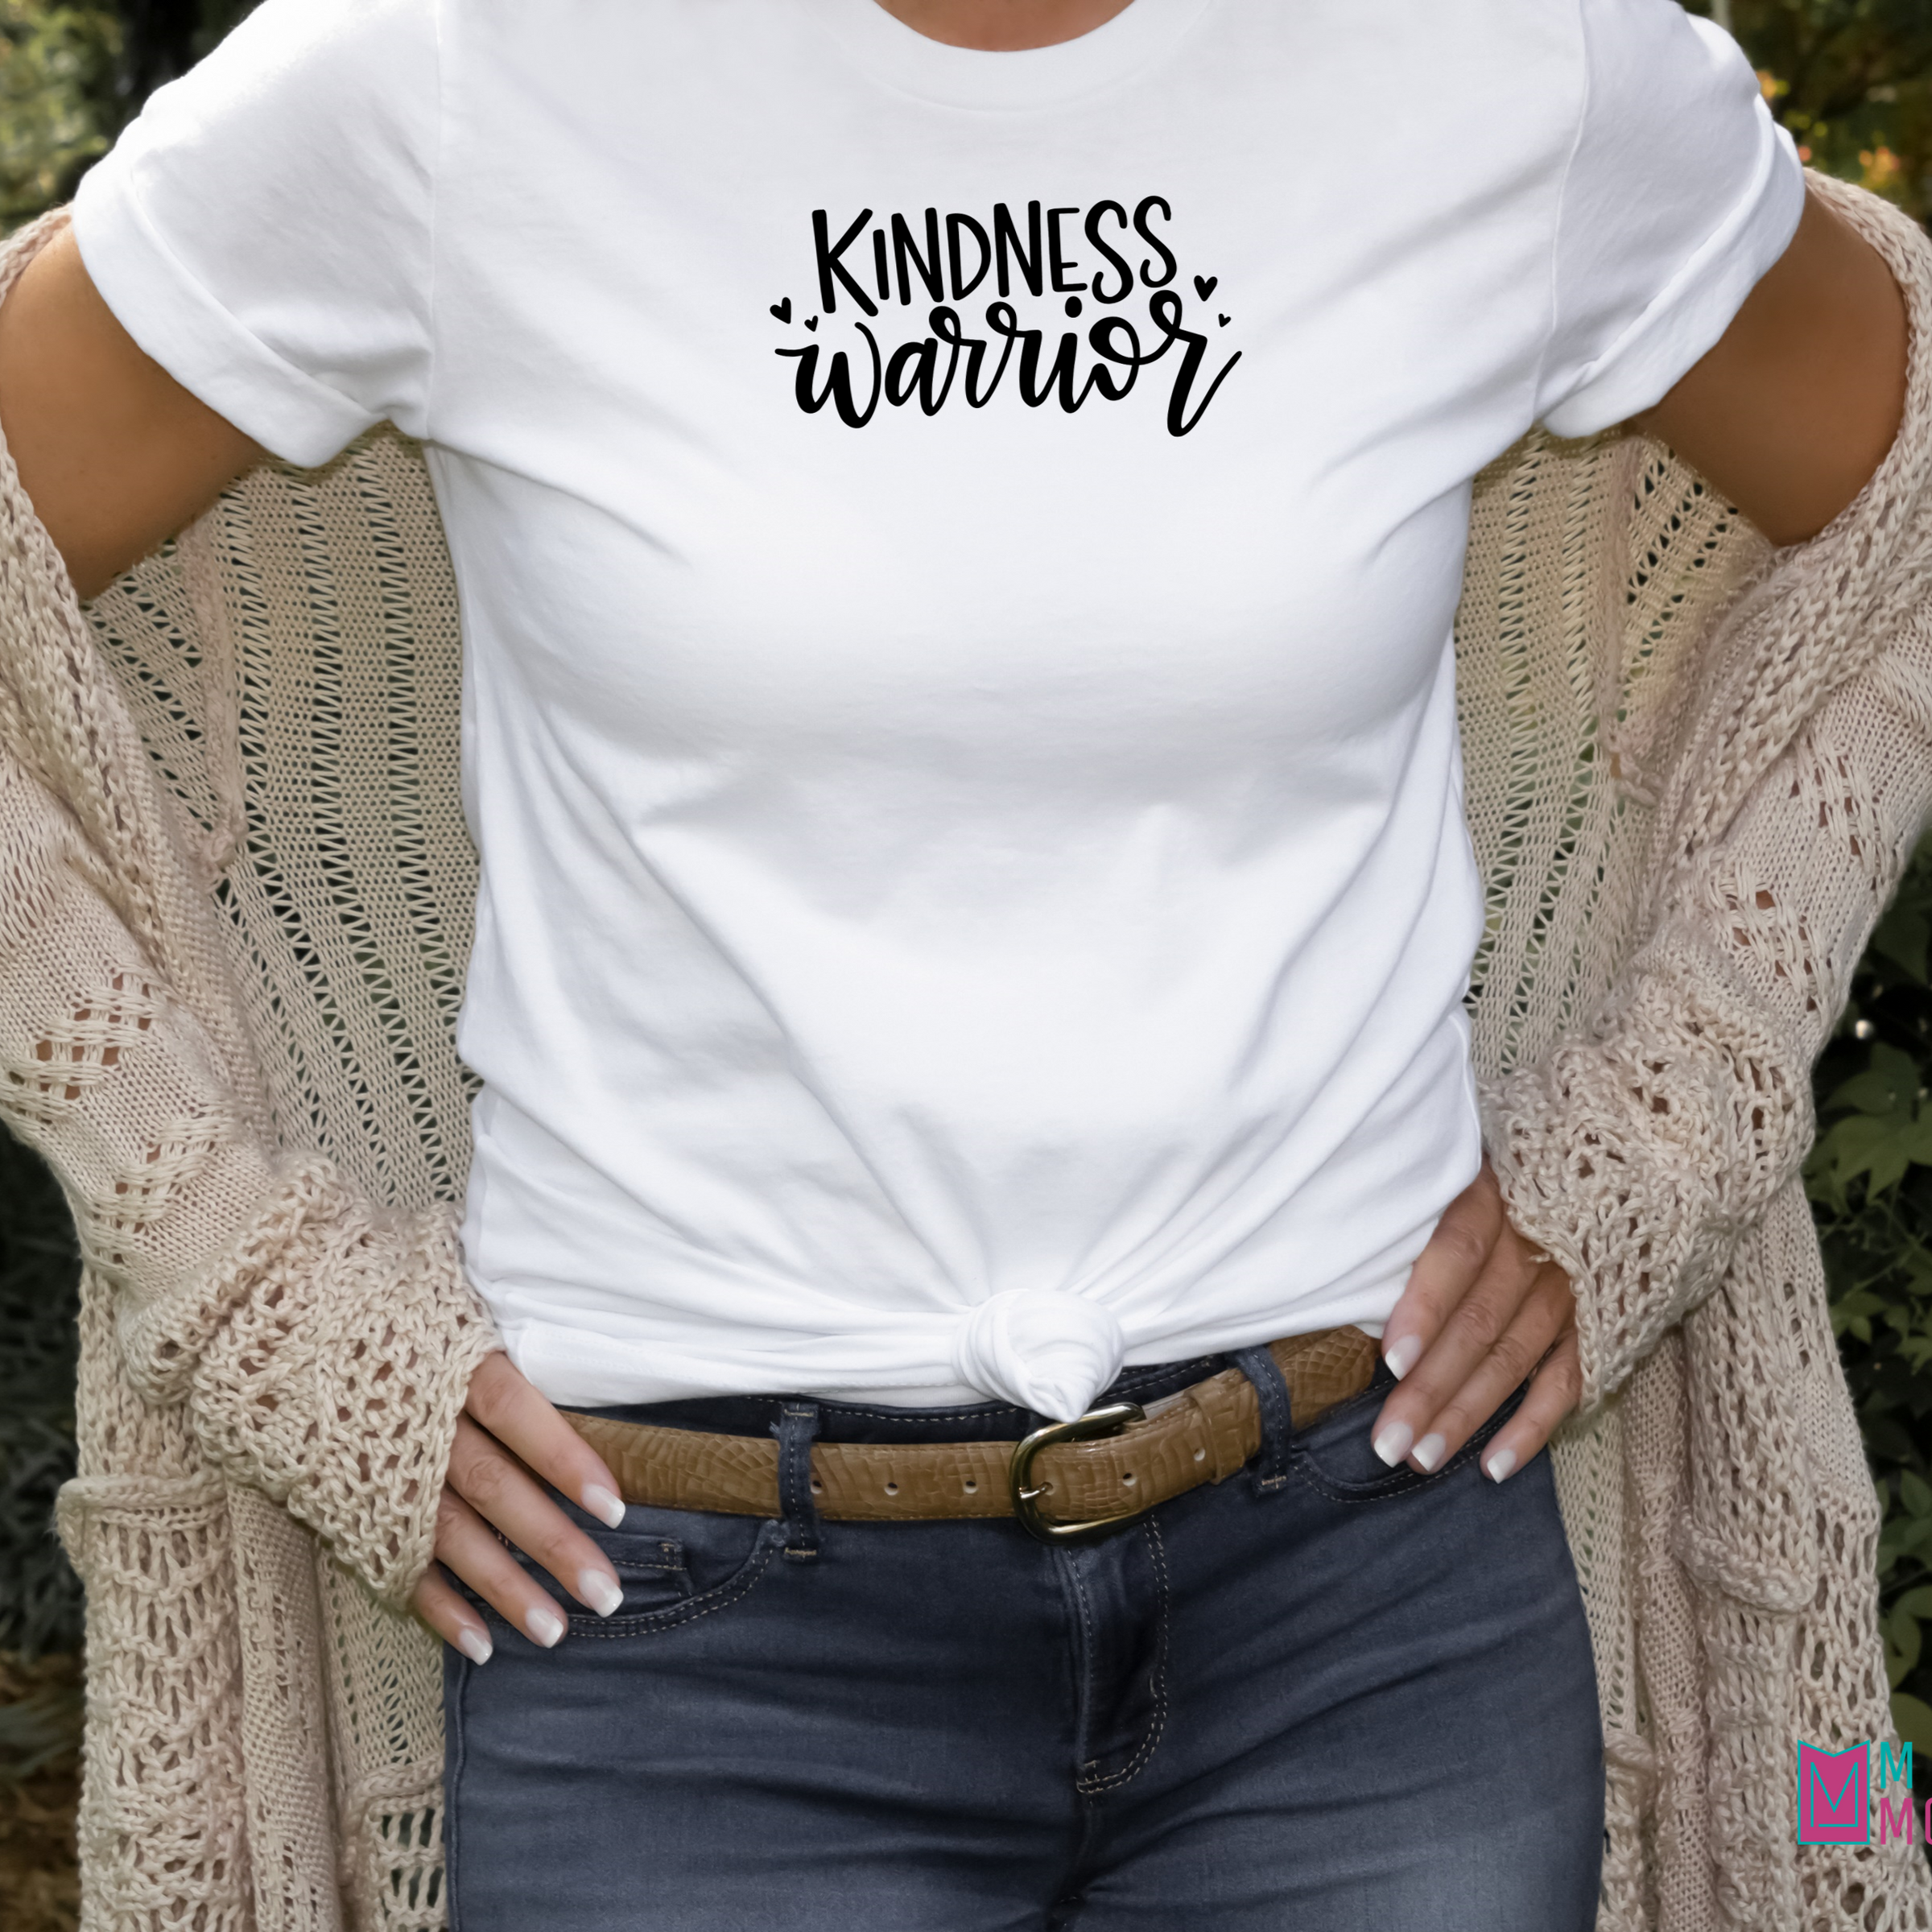 Woman wearing a white bella canvas 3001 t-shirt with black lettering reading Kindness warrior.